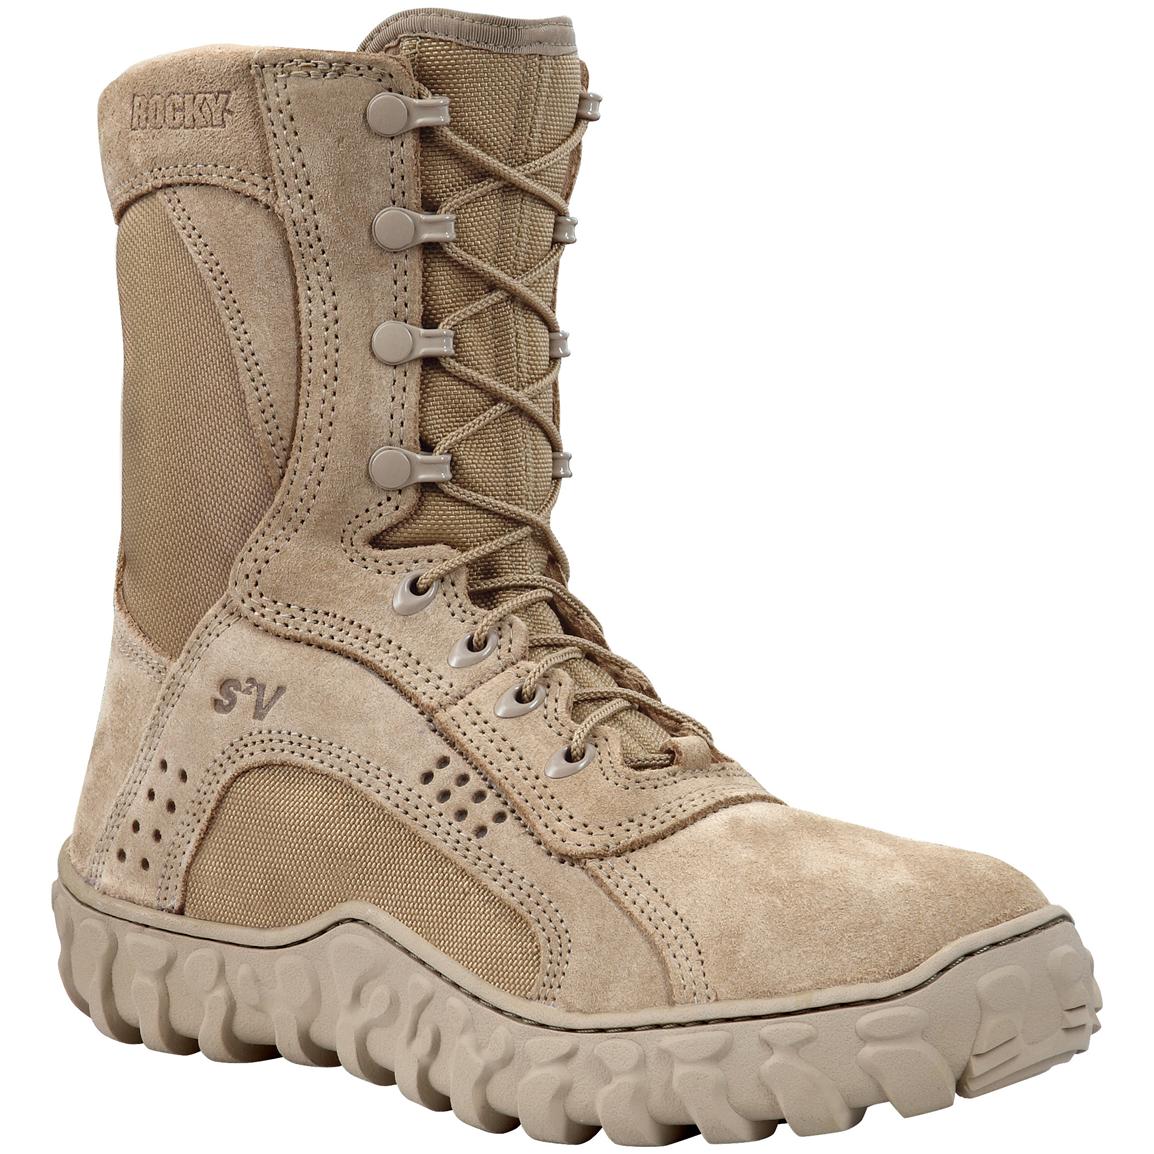 Men's RockyÂ® S2V Steel Toe Military Boots - 218842, Combat & Tactical Boots at Sportsman's Guide